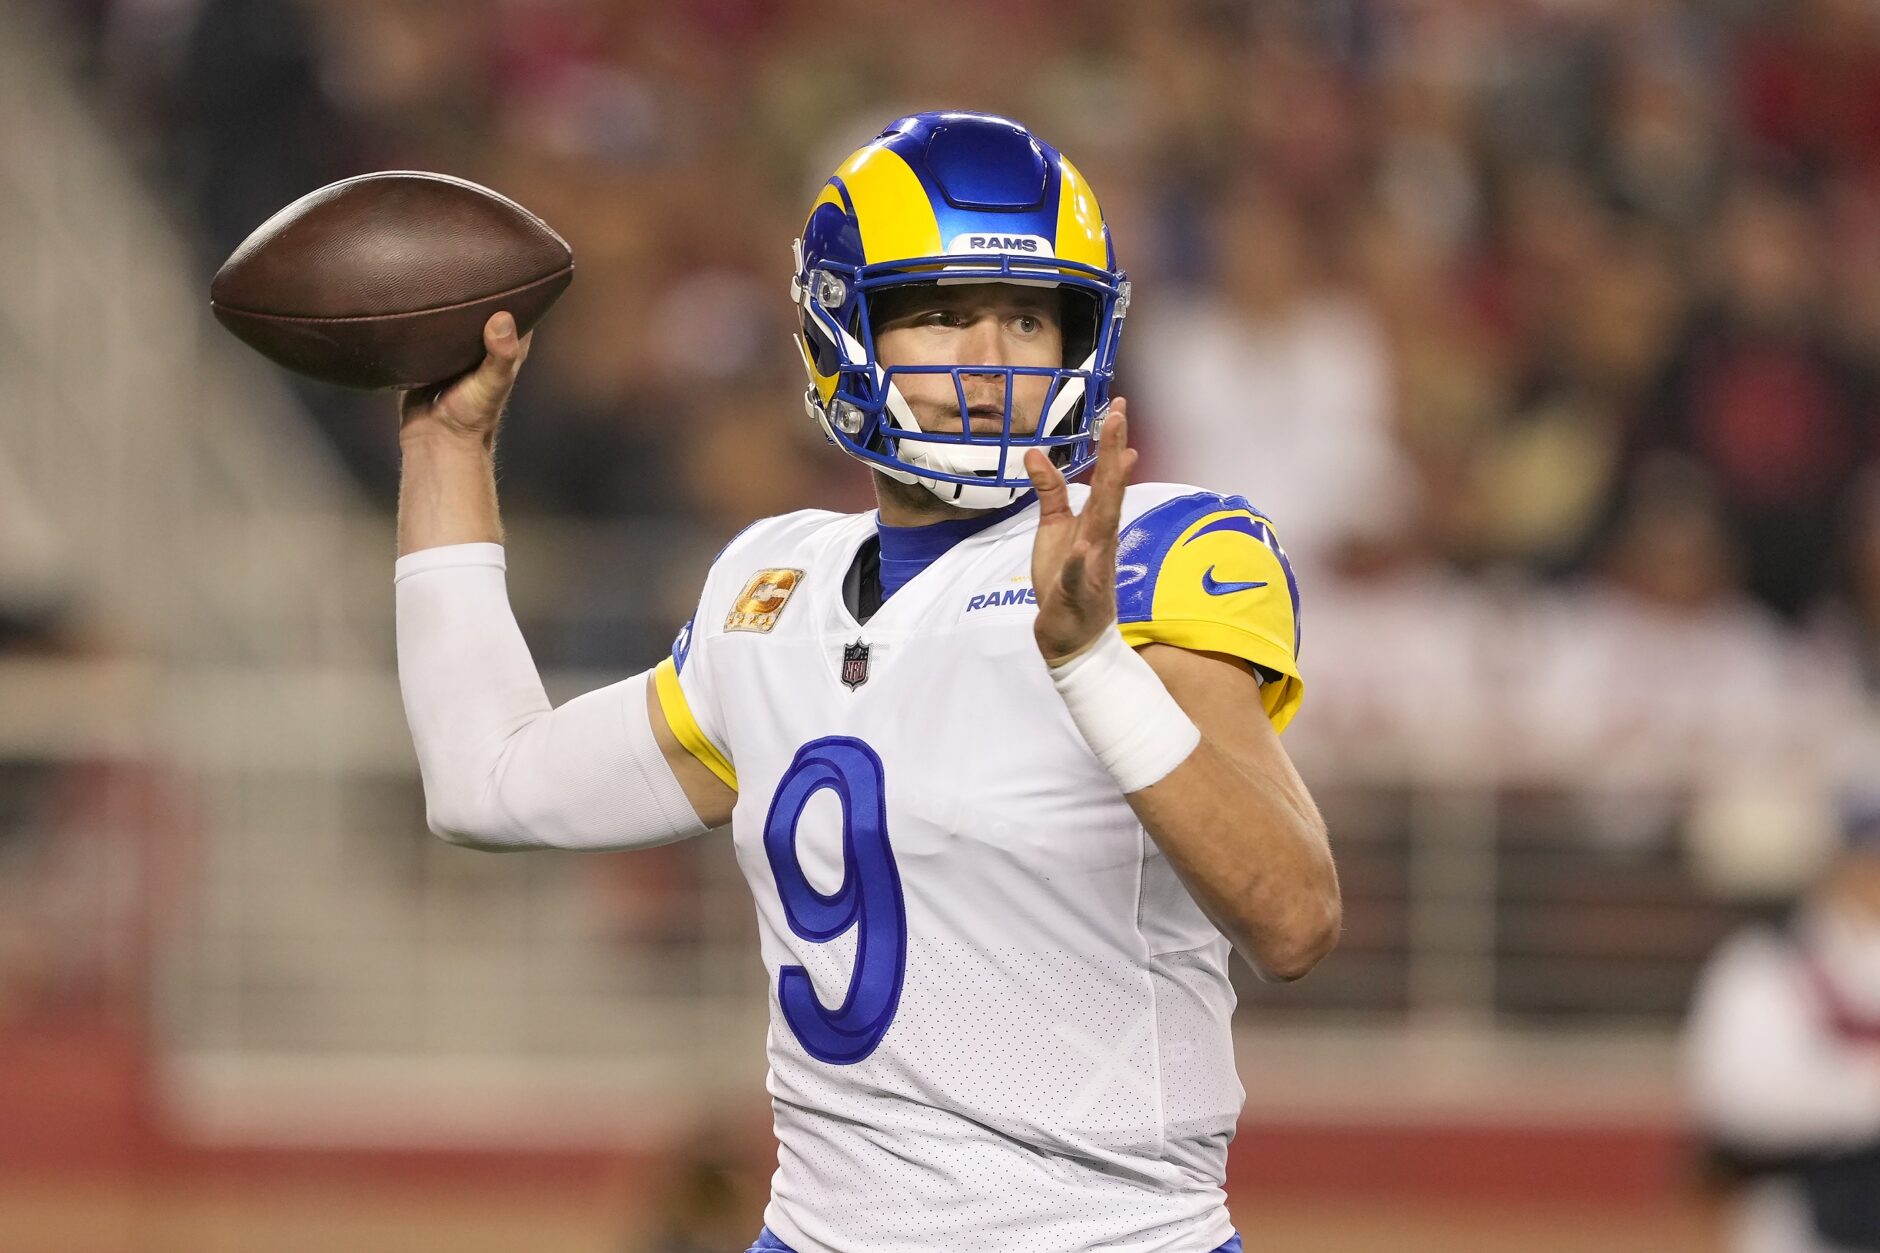 forligsmanden Akkumulering Frosset NFL to pay St. Louis $790 million over Rams move to Los Angeles |  Courthouse News Service